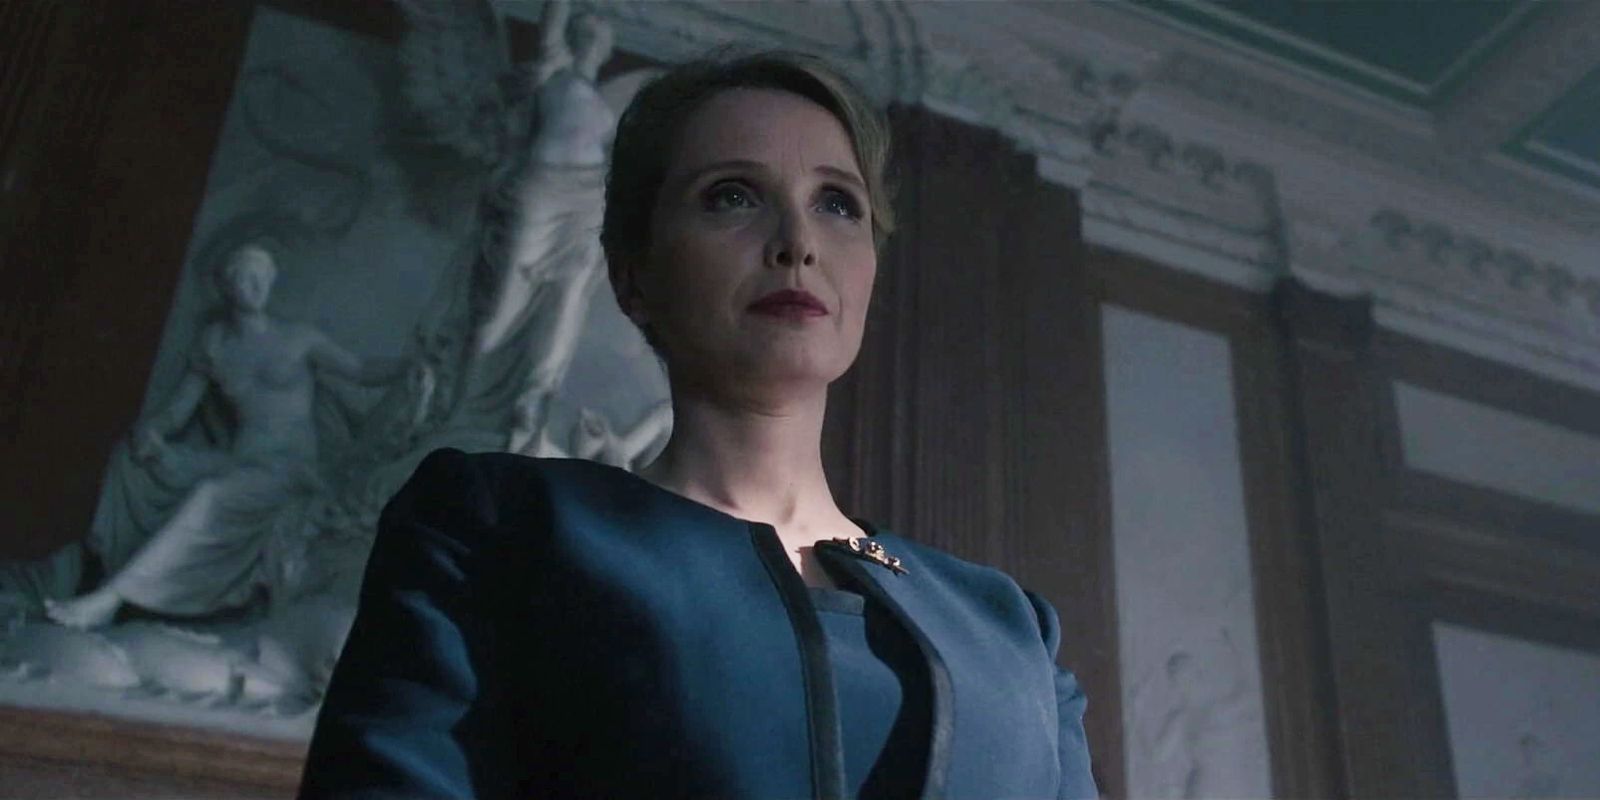 Madame B looks down sternly in Avengers: Age of Ultron.